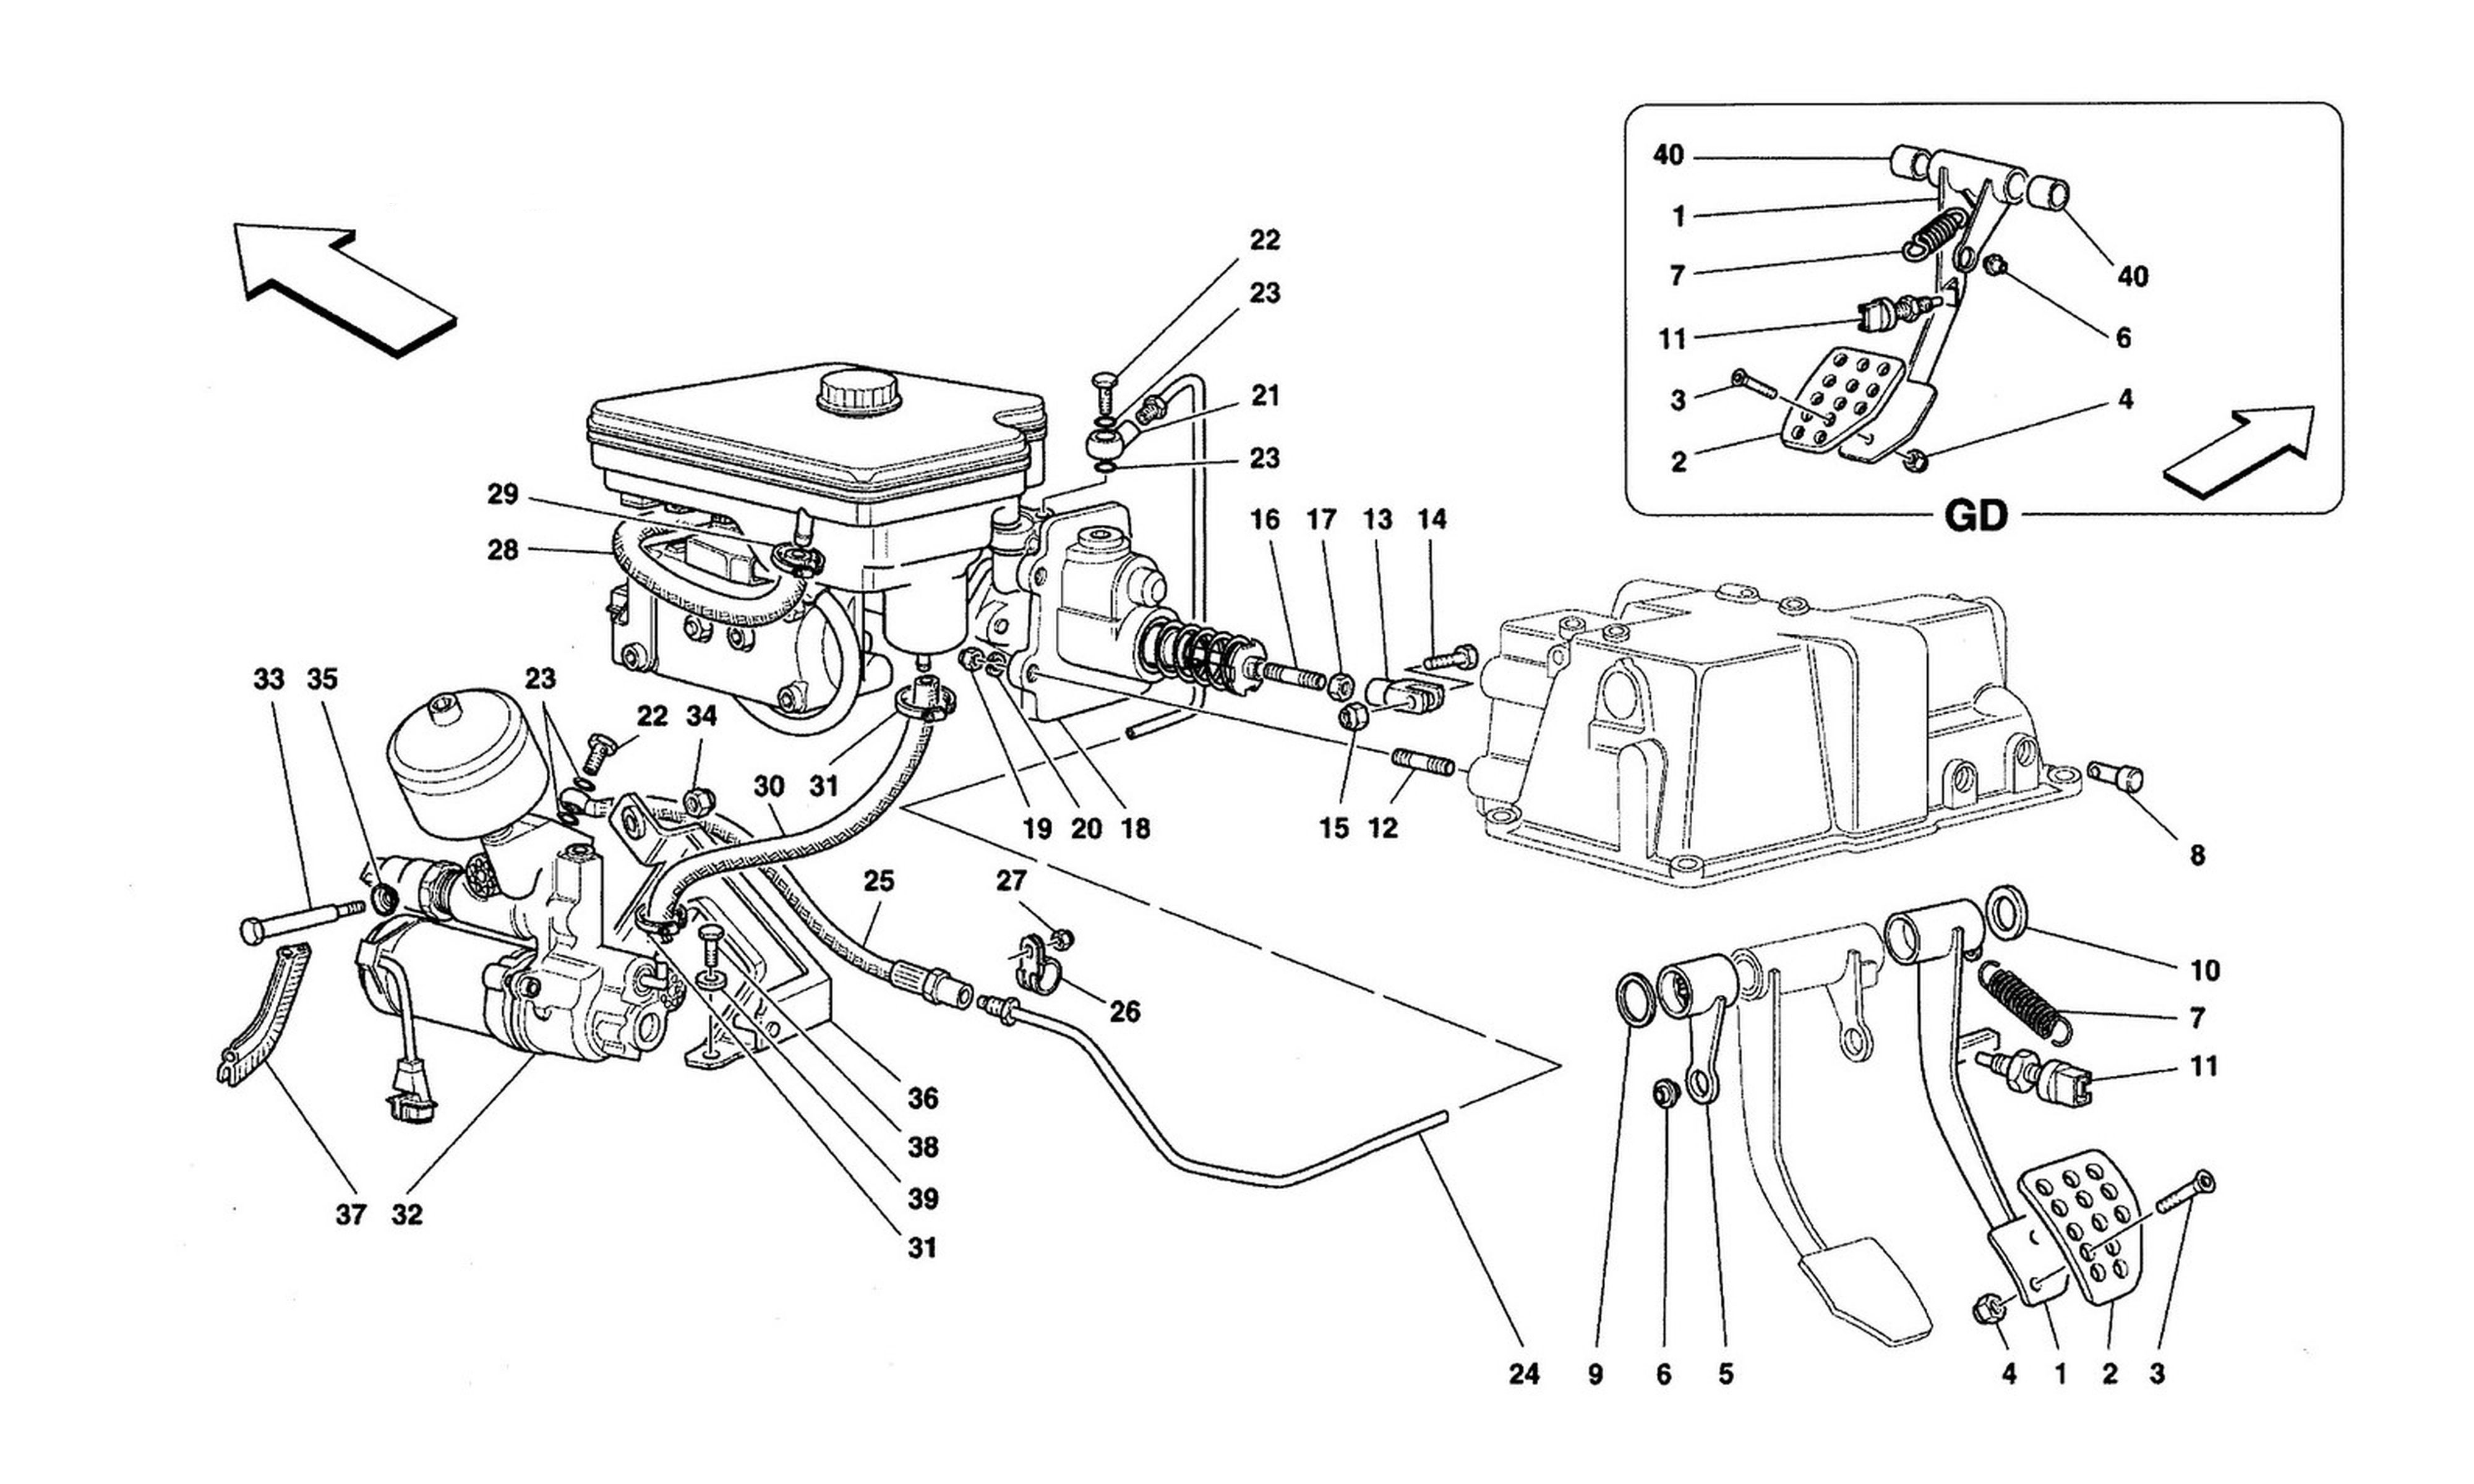 Schematic: Brake Hydraulic System -Not For Abs Bosch And 355 F1 Cars-